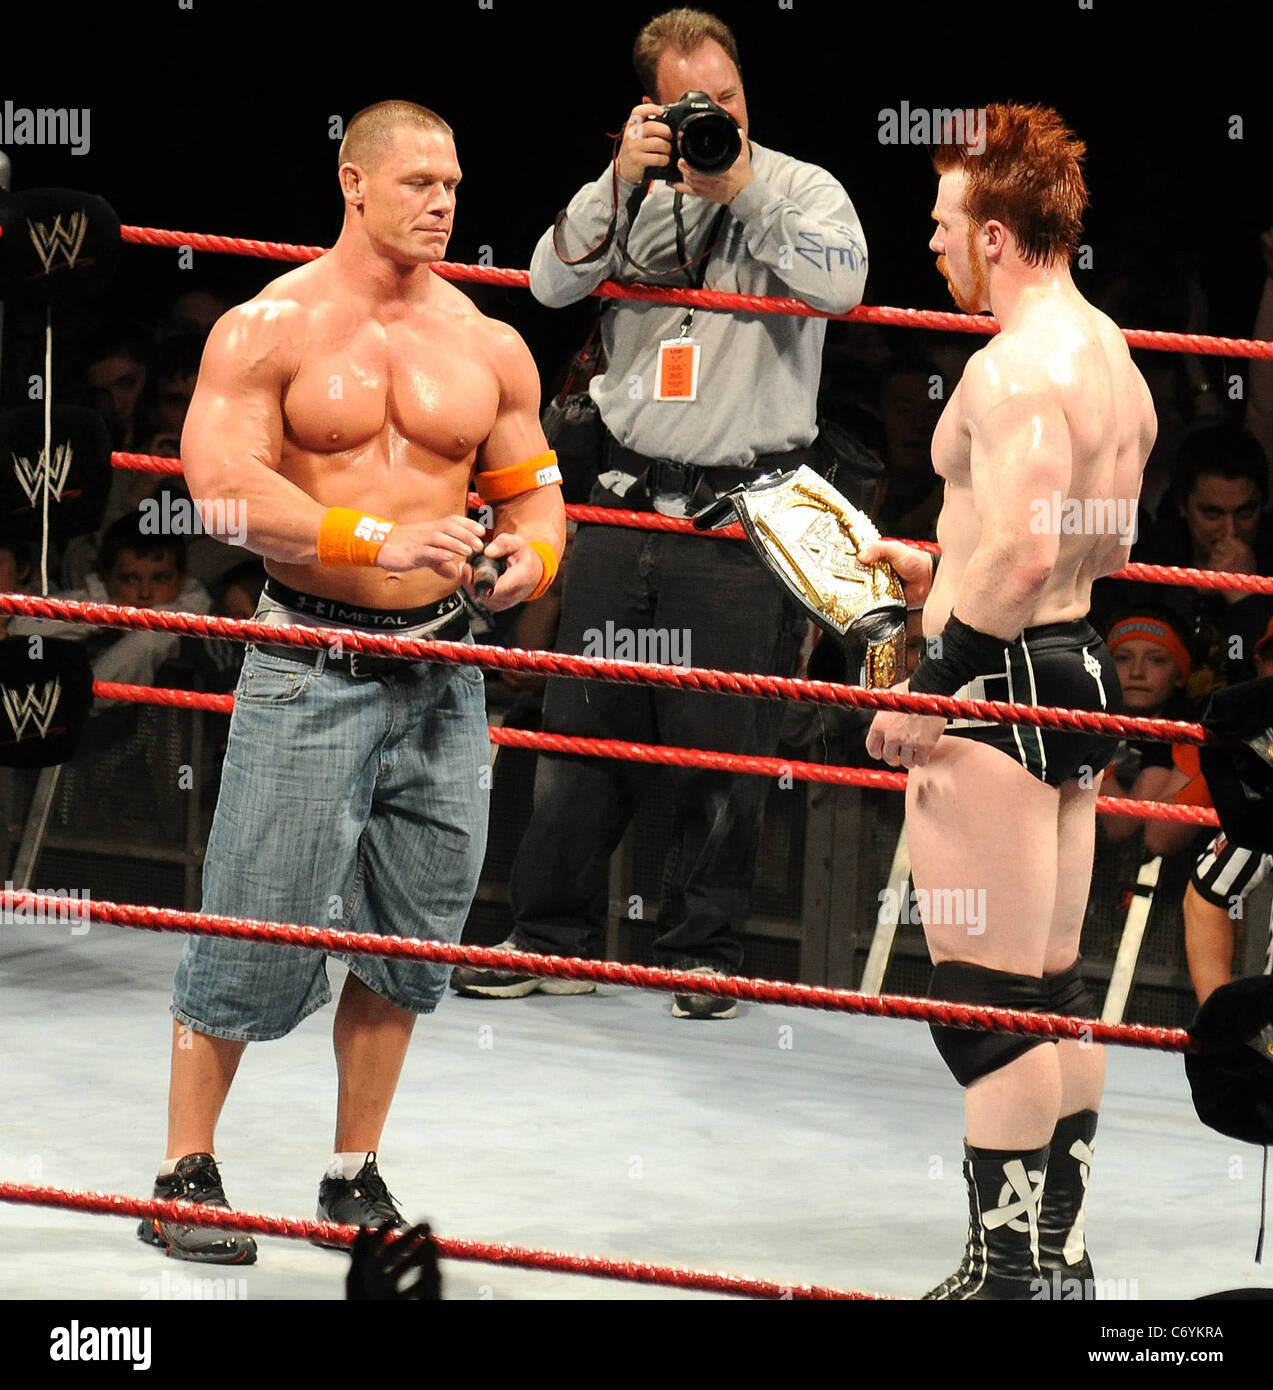 WWE Champion John Cena faced former WWE Champion Sheamus for the title belt  at The O2 arena and after long battle Cena won when Stock Photo - Alamy